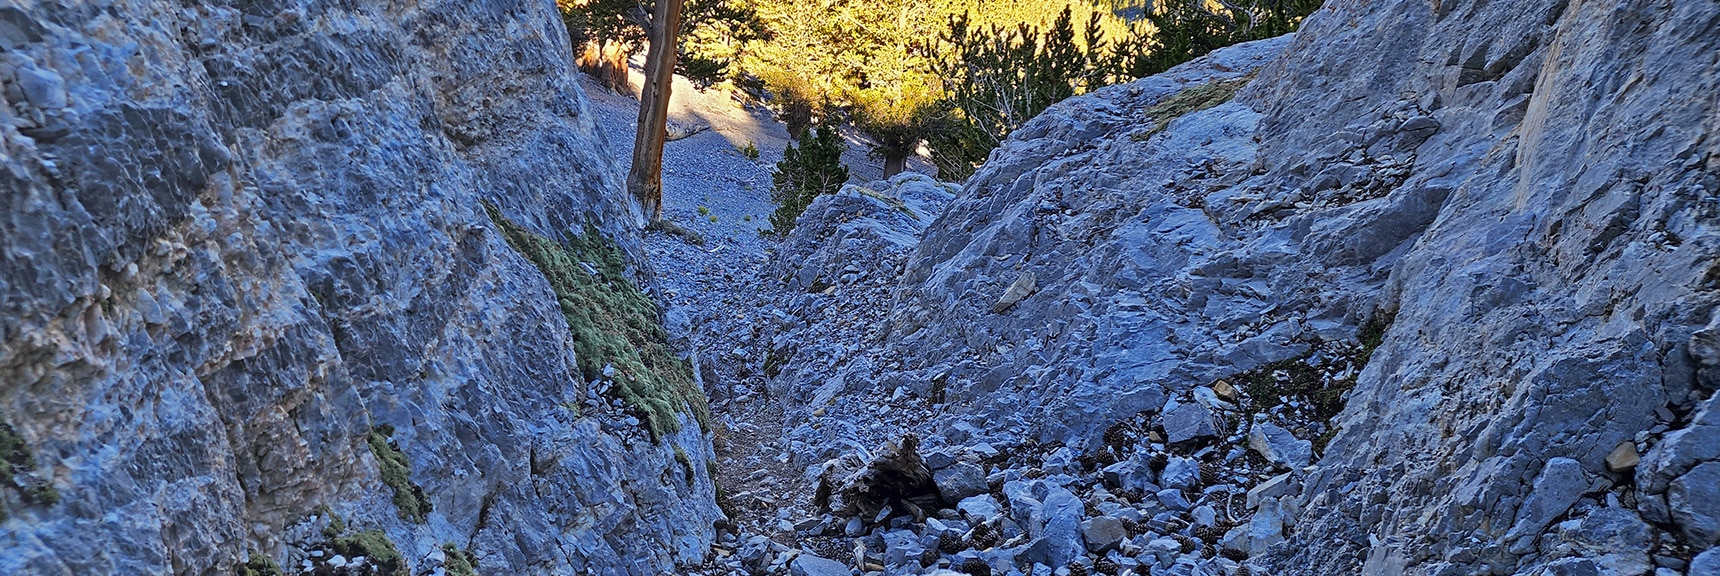 Final Channel Below the Steepest Portion of Descent Chute | Mummy Mountain Grand Crossing | Lee Canyon to Deer Creek Road | Mt Charleston Wilderness | Spring Mountains, Nevada |